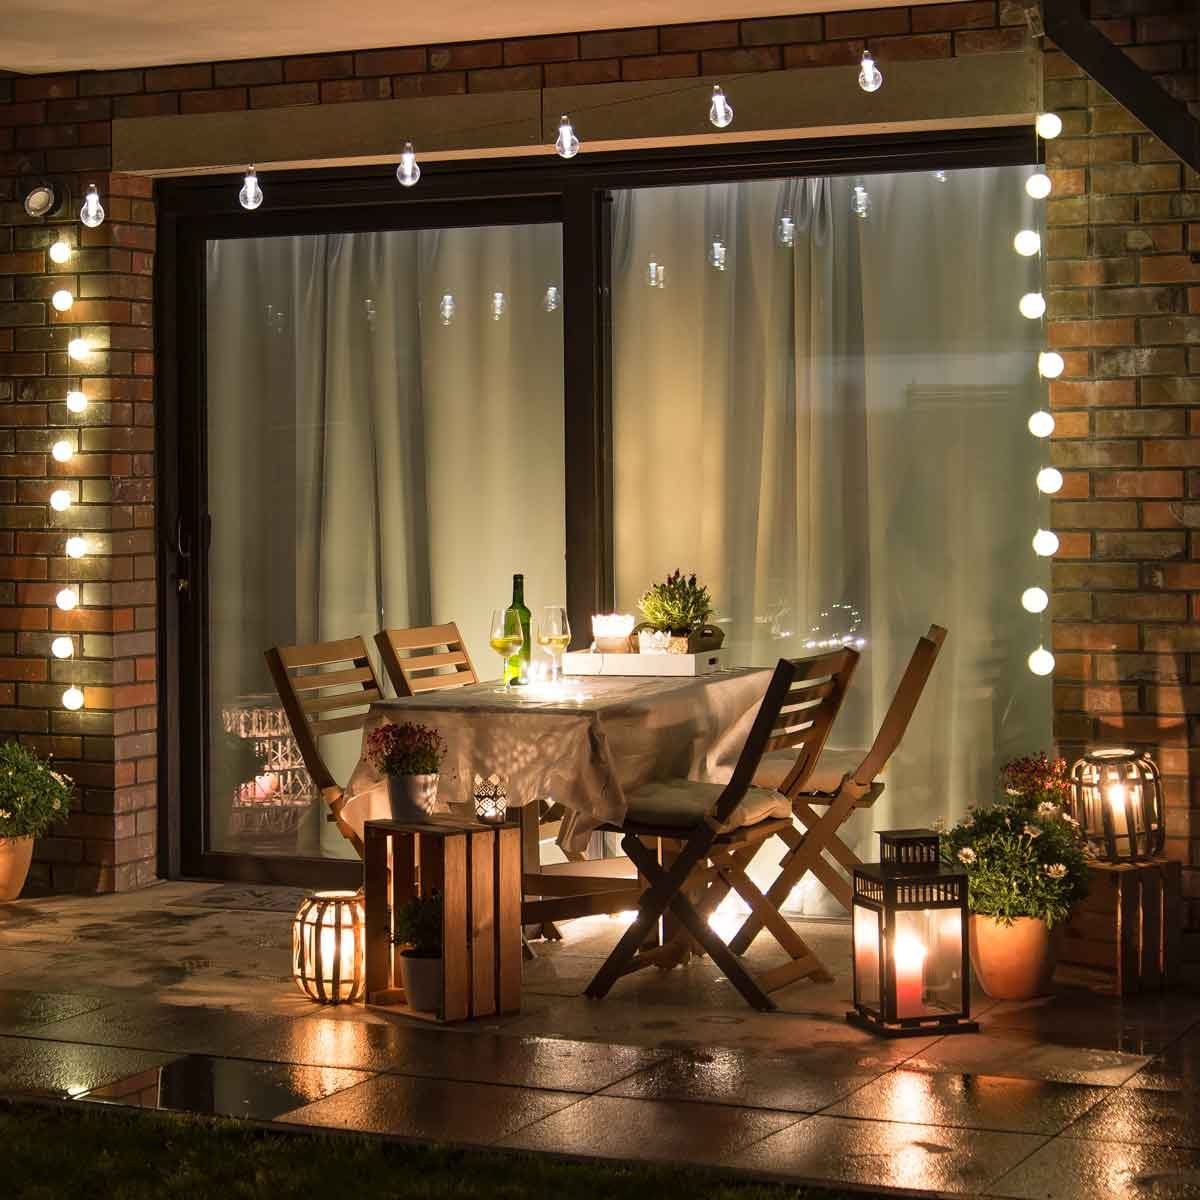 Level Up the Backyard with the Best Garden Lights